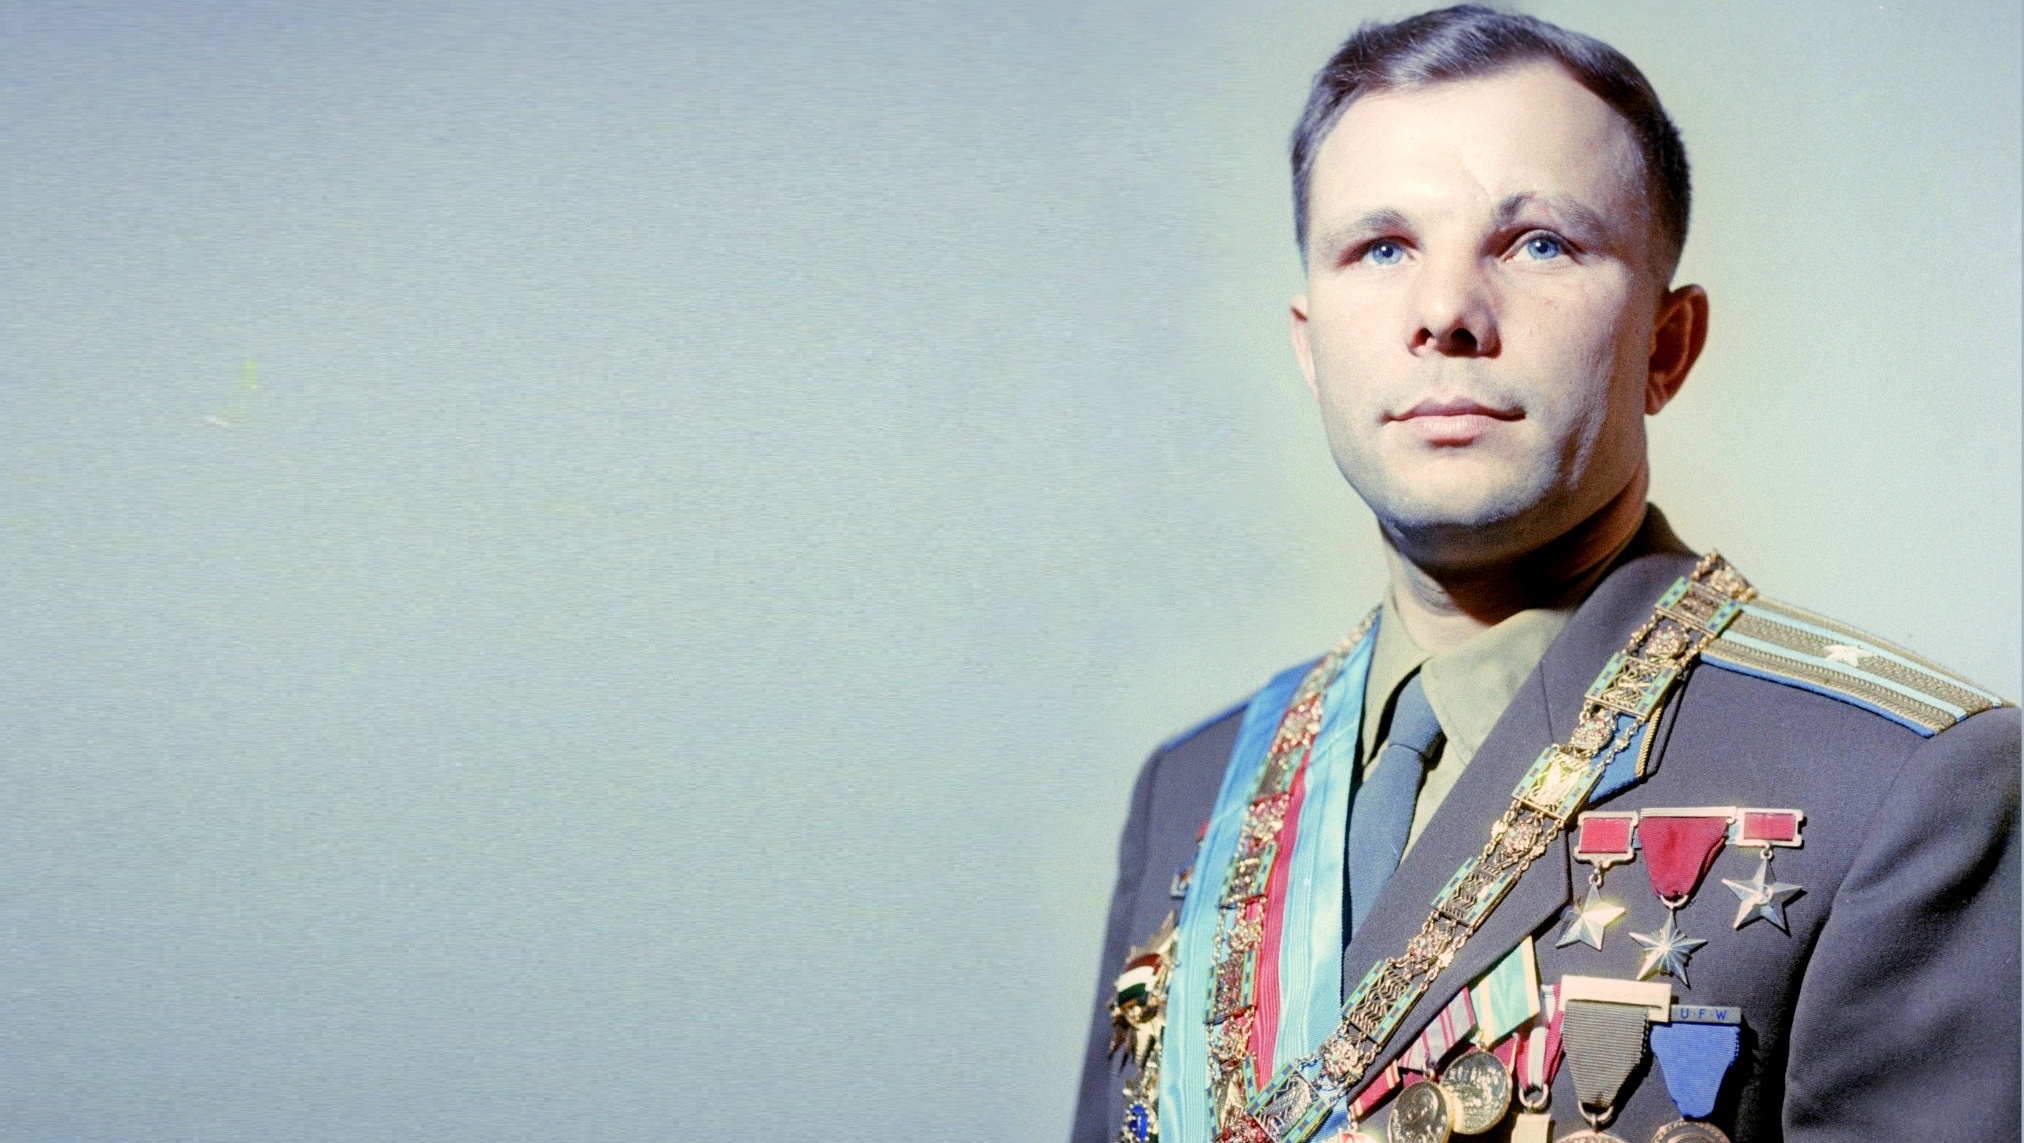 Yuri Alekseyevich Gagarin was a Soviet Air Forces pilot and cosmonaut